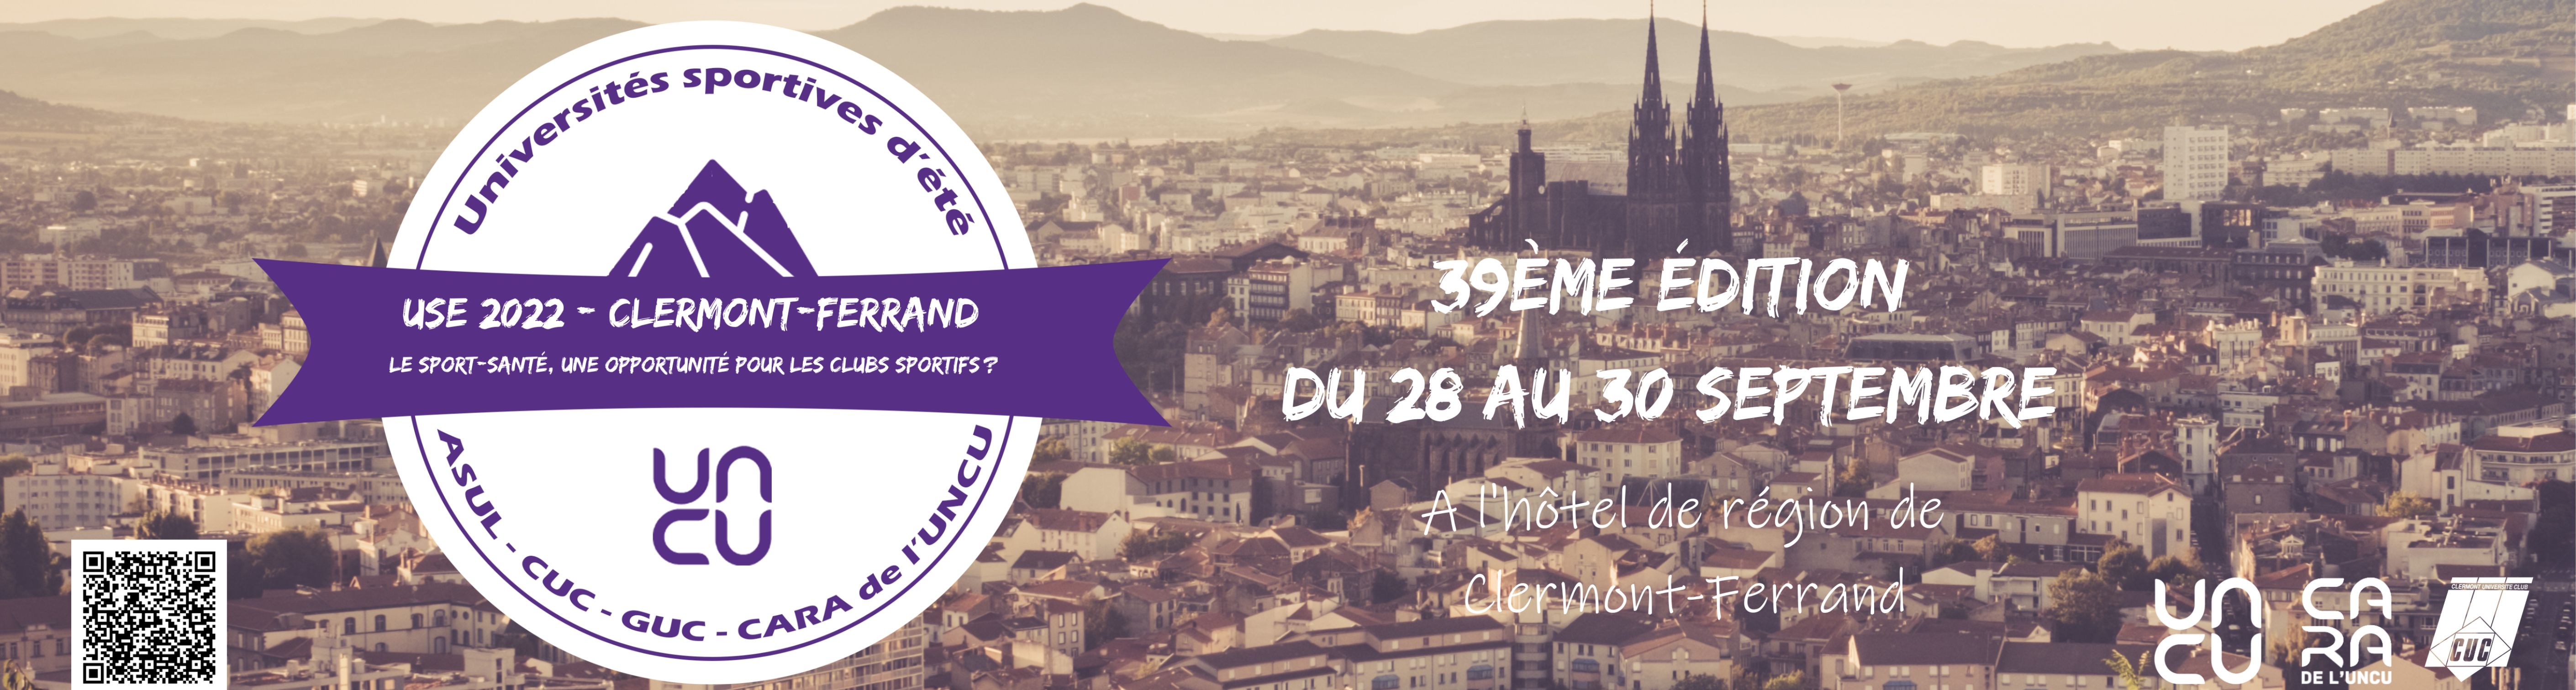 USE 2022 Clermont-Ferrand